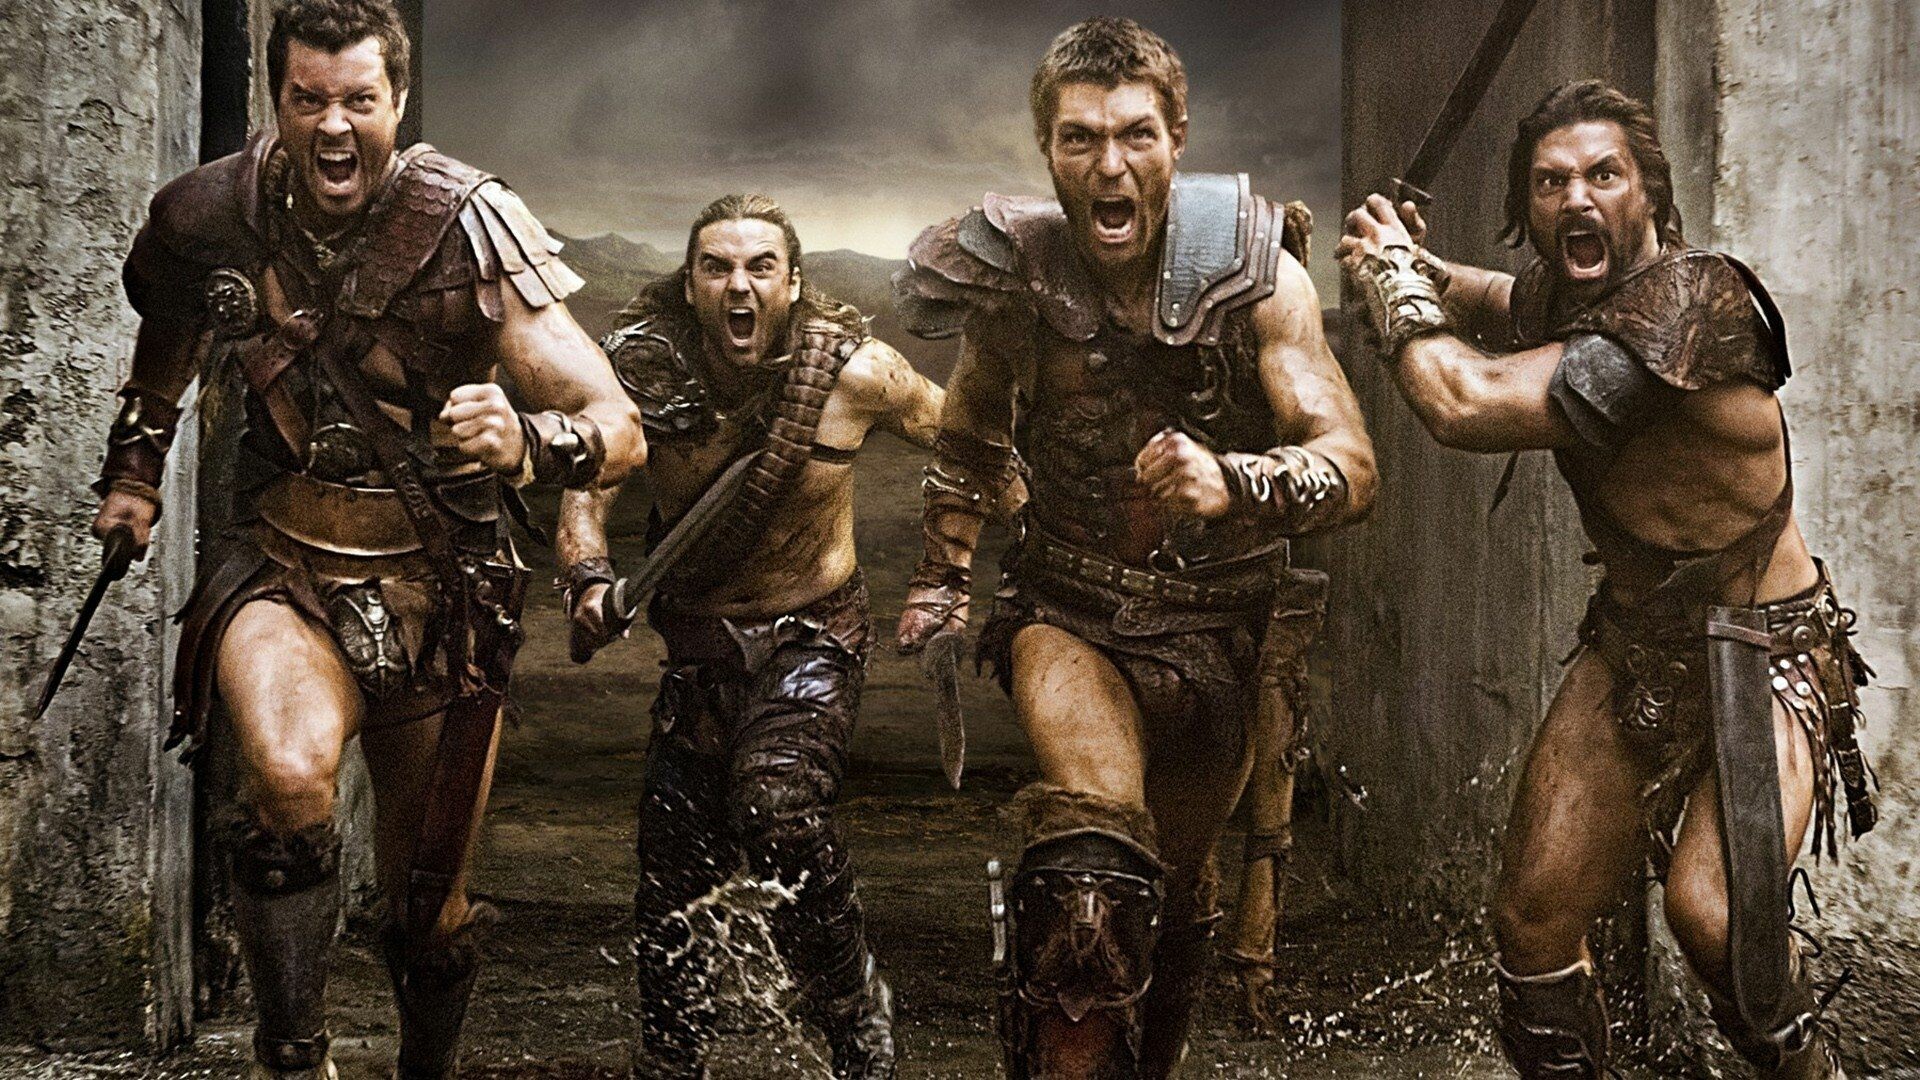 Spartacus: Gods of the Arena: Dustin Clare as Gannicus, Manu Bennett as Crixus, Daniel Feuerriegel as Agron. 1920x1080 Full HD Wallpaper.